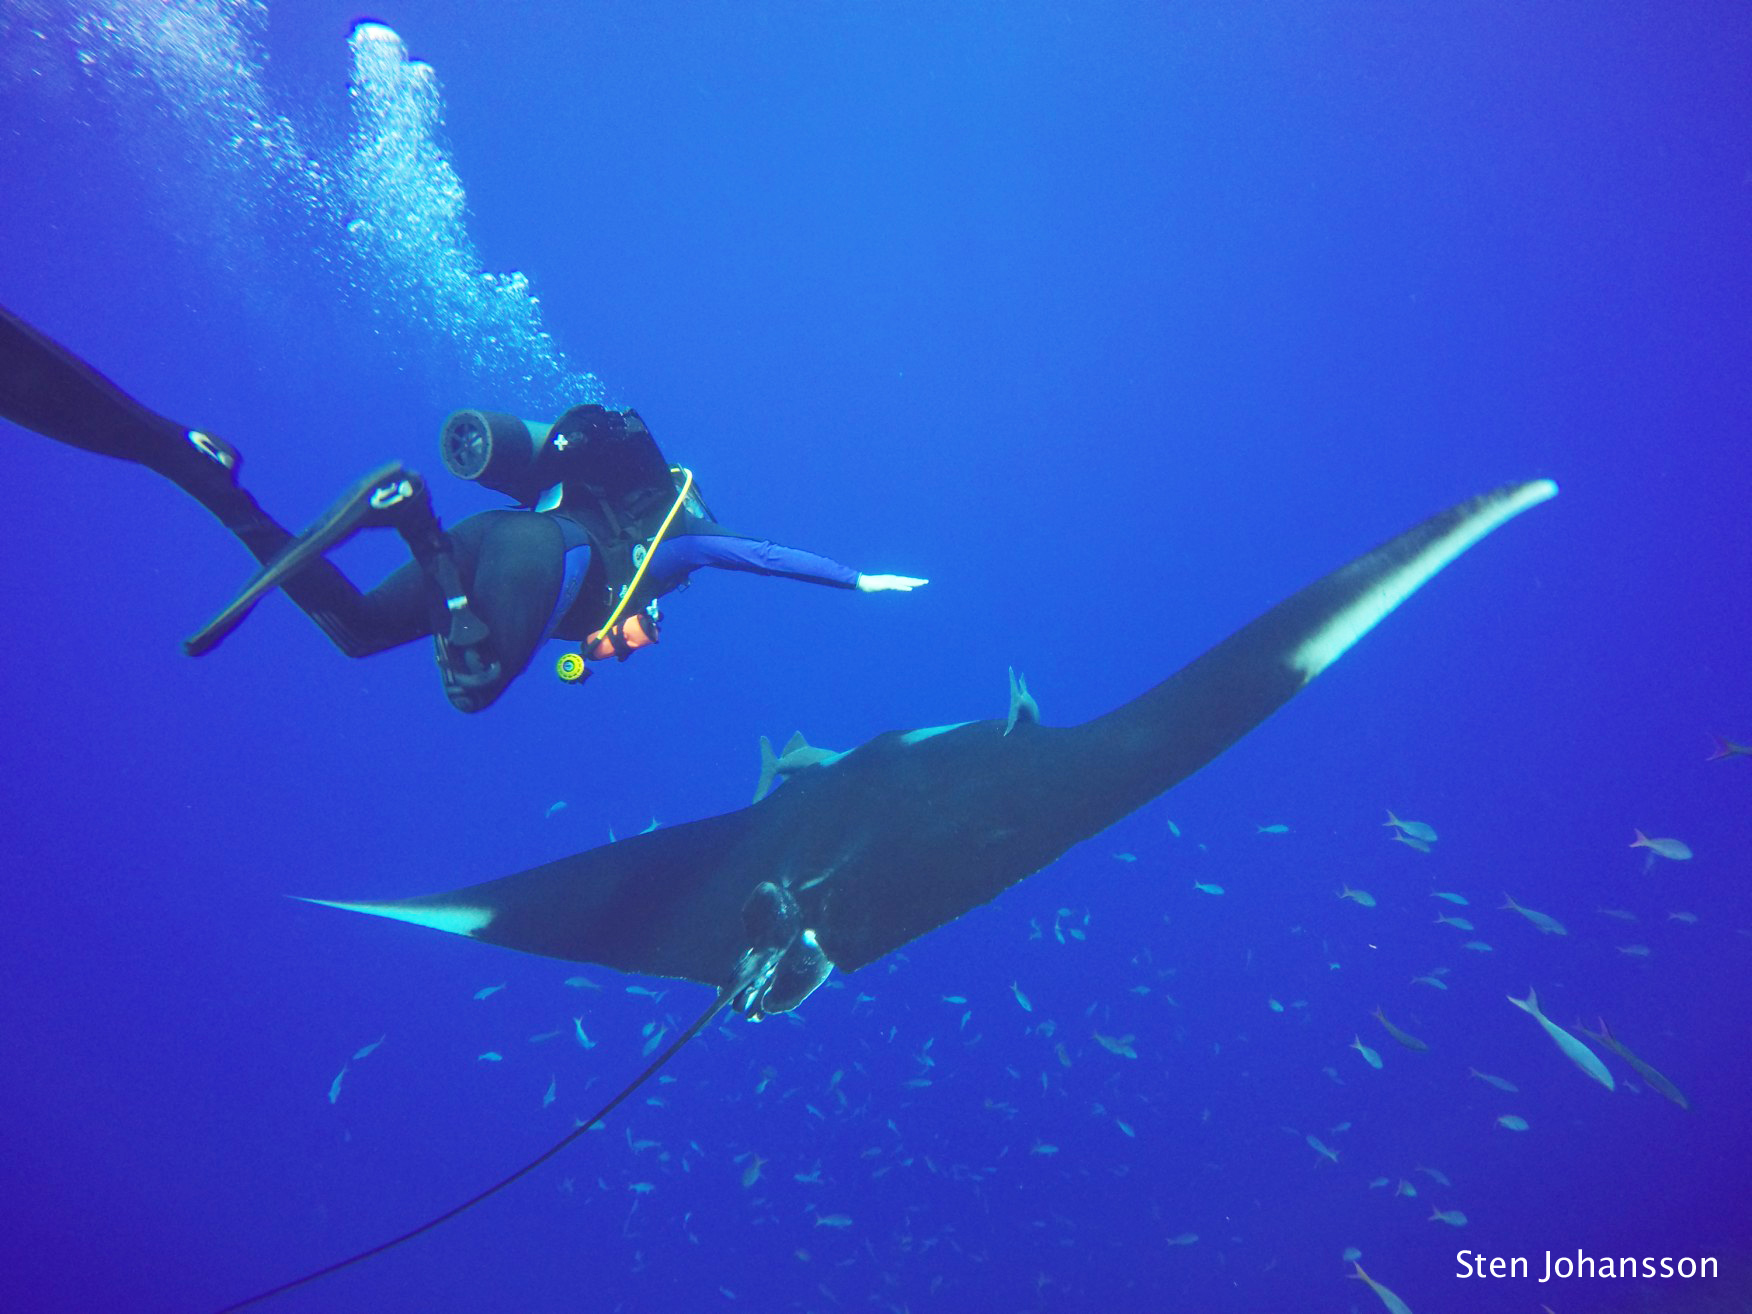 Time of the year for giant manta mating?